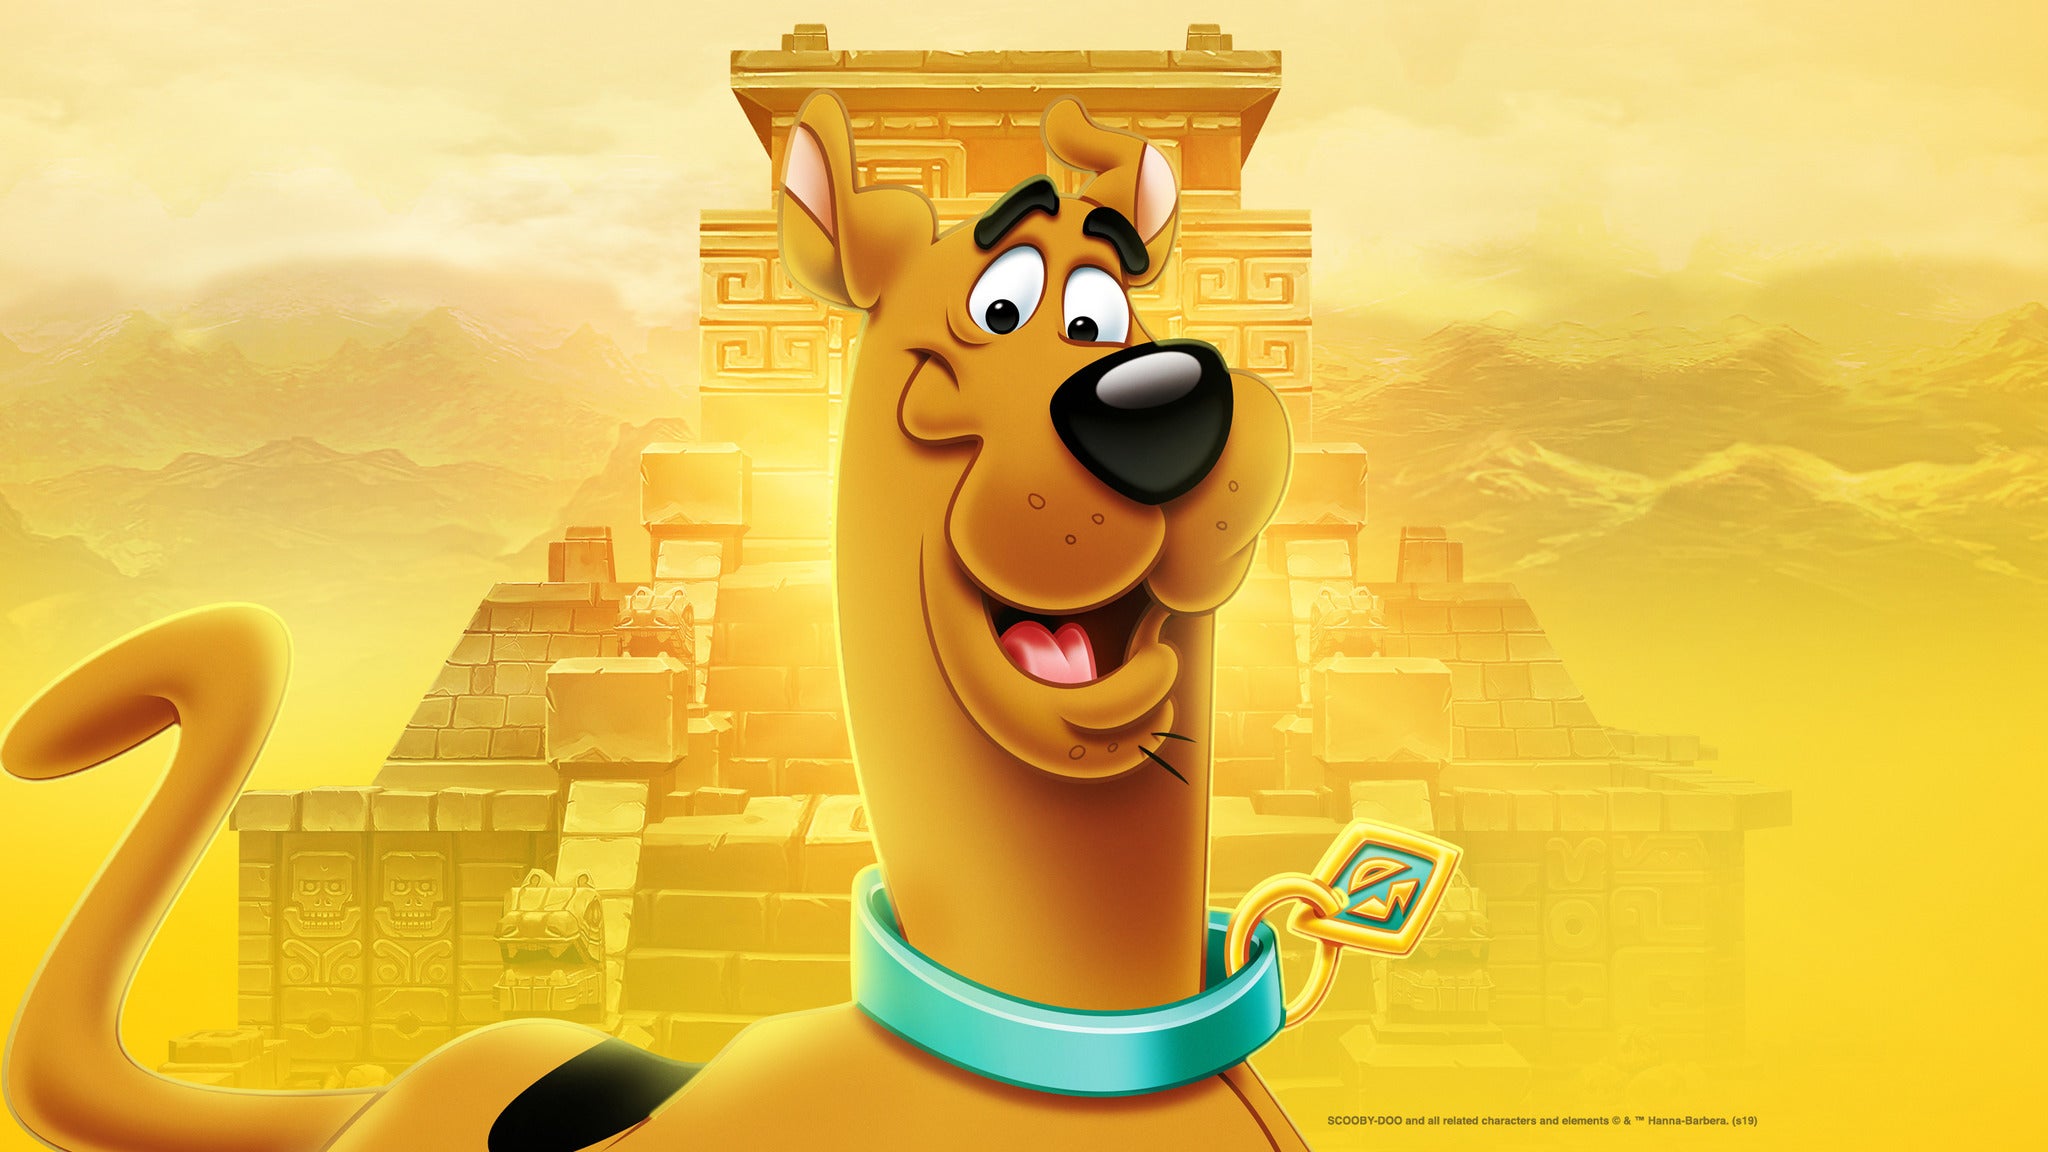 Scooby-Doo! and The Lost City of Gold (en anglais) in Laval promo photo for Prévente presale offer code